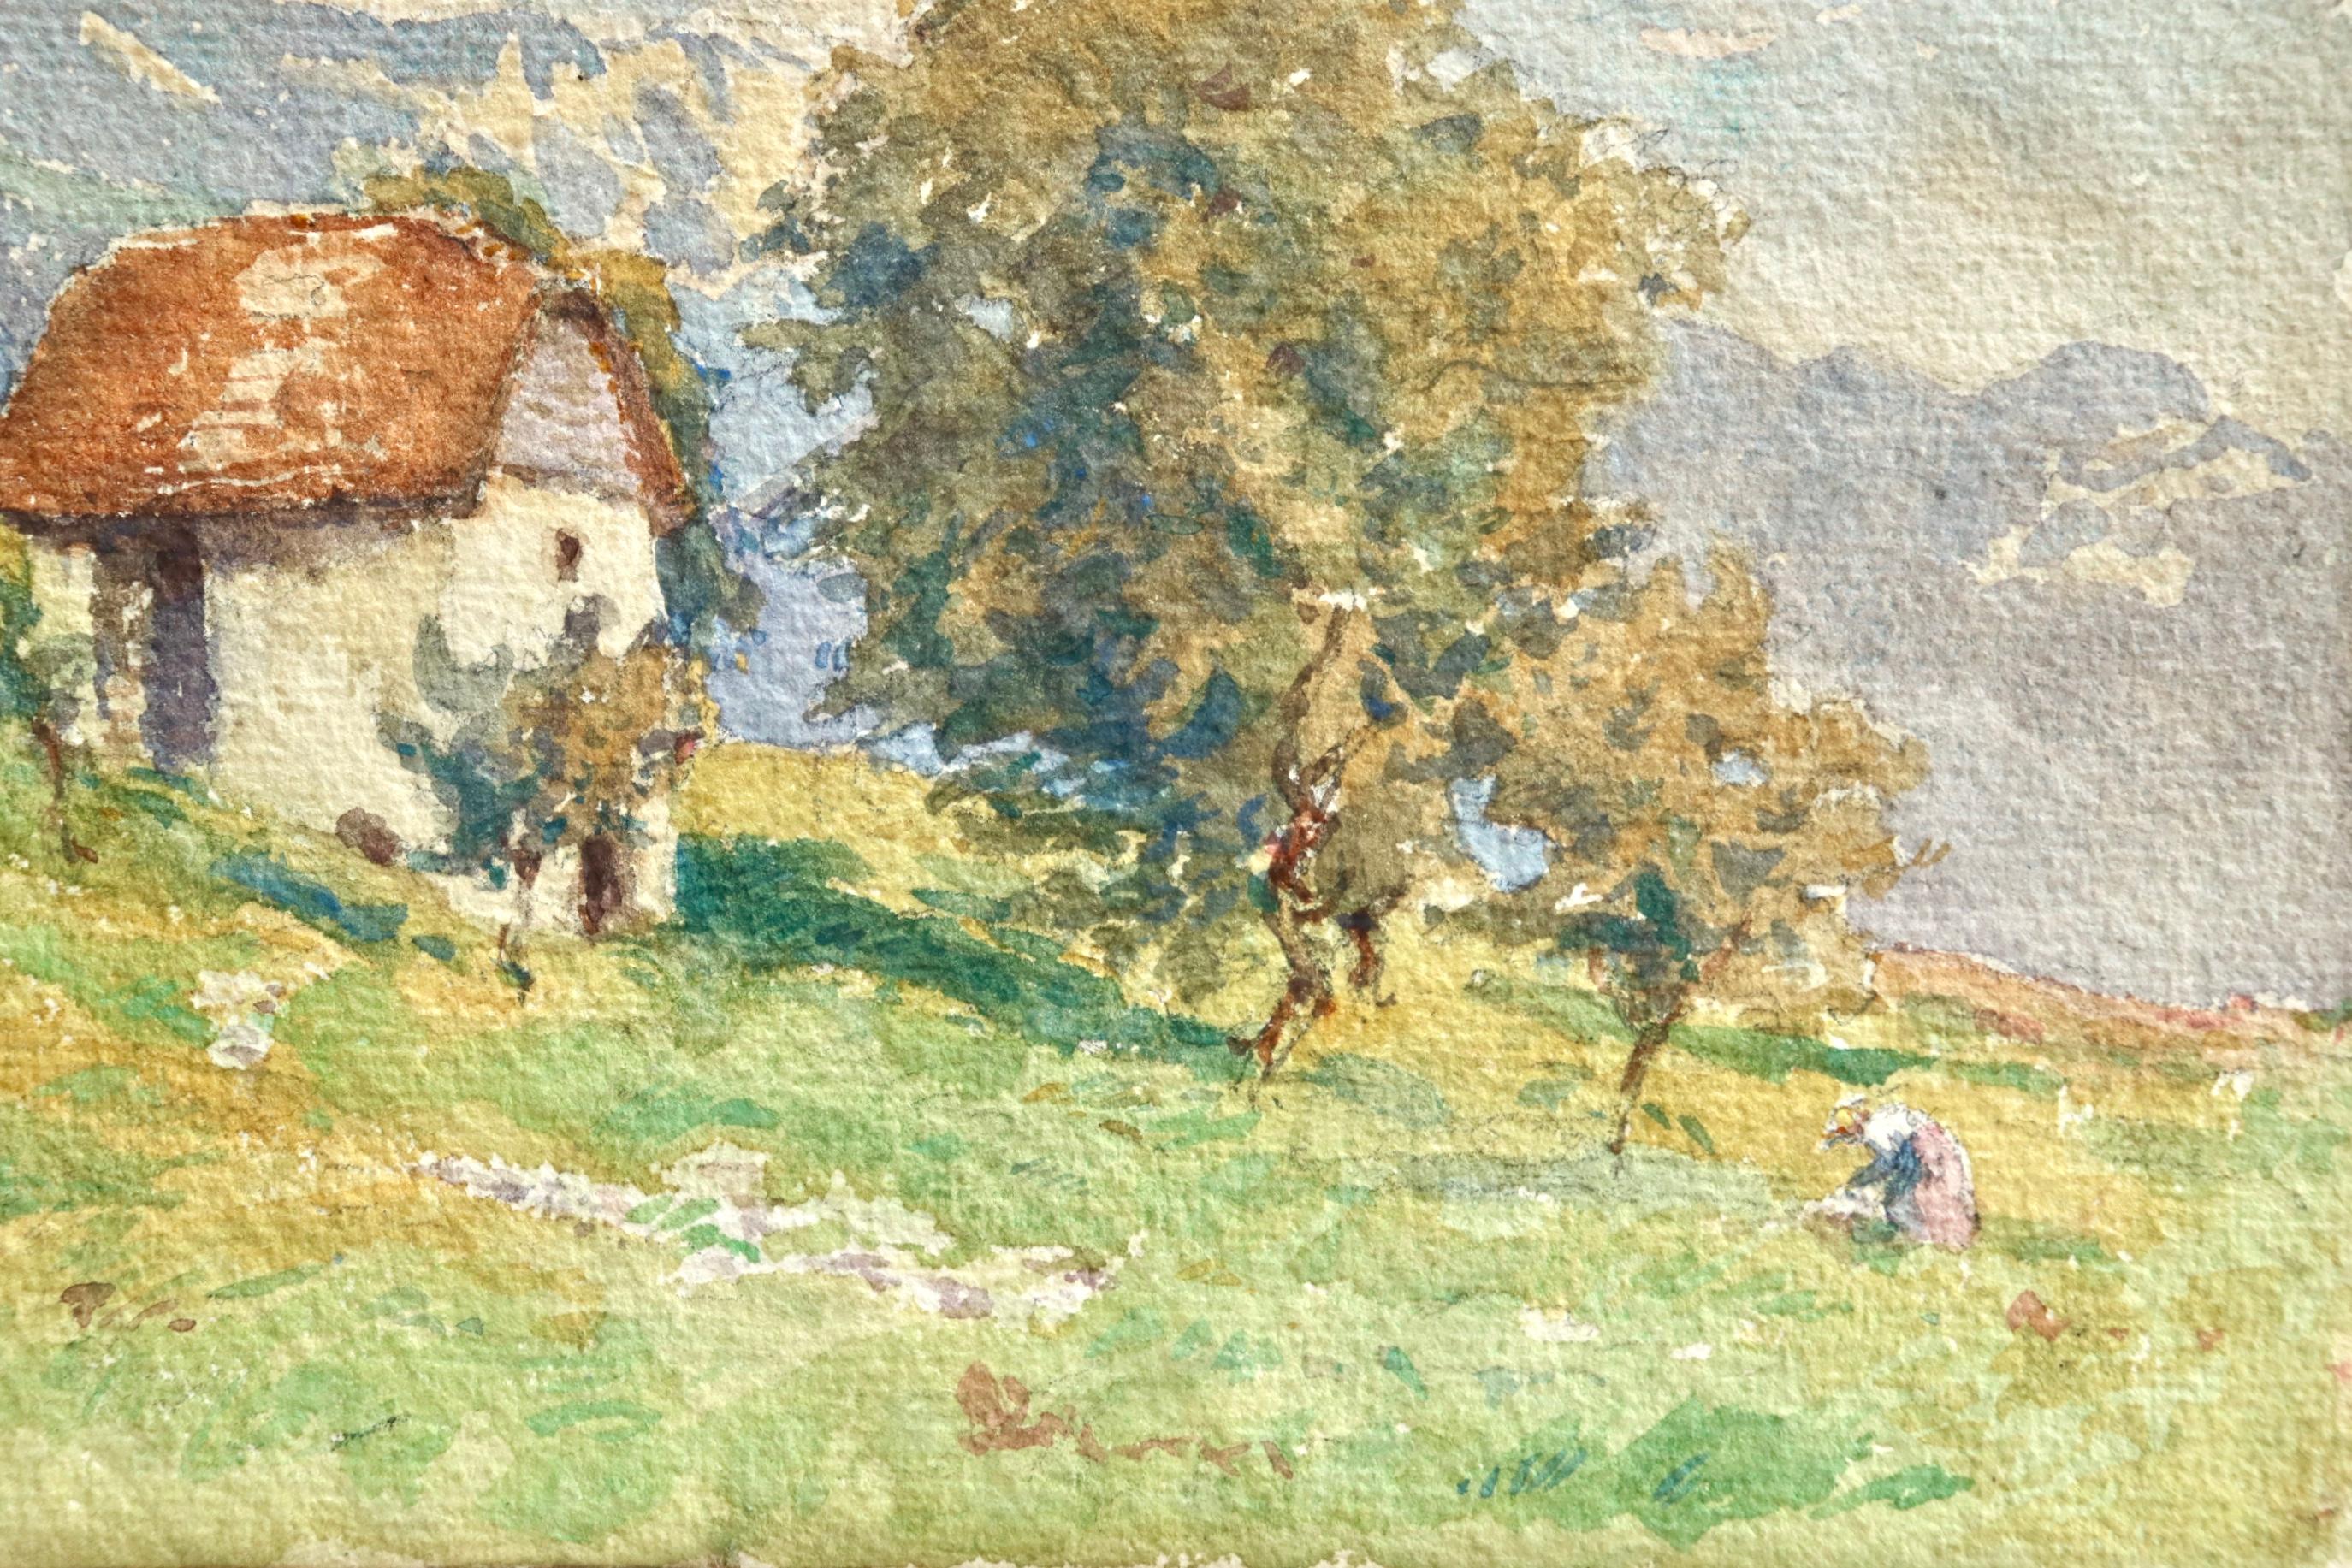 Watercolour on paper circa 1925 by French Impressionist painter Henri Duhem depicting a woman standing near a small white chalet house in the hill near Lake Geneva (Lac Léman in French). White clouds roll through the blue on a sunny day. Signed